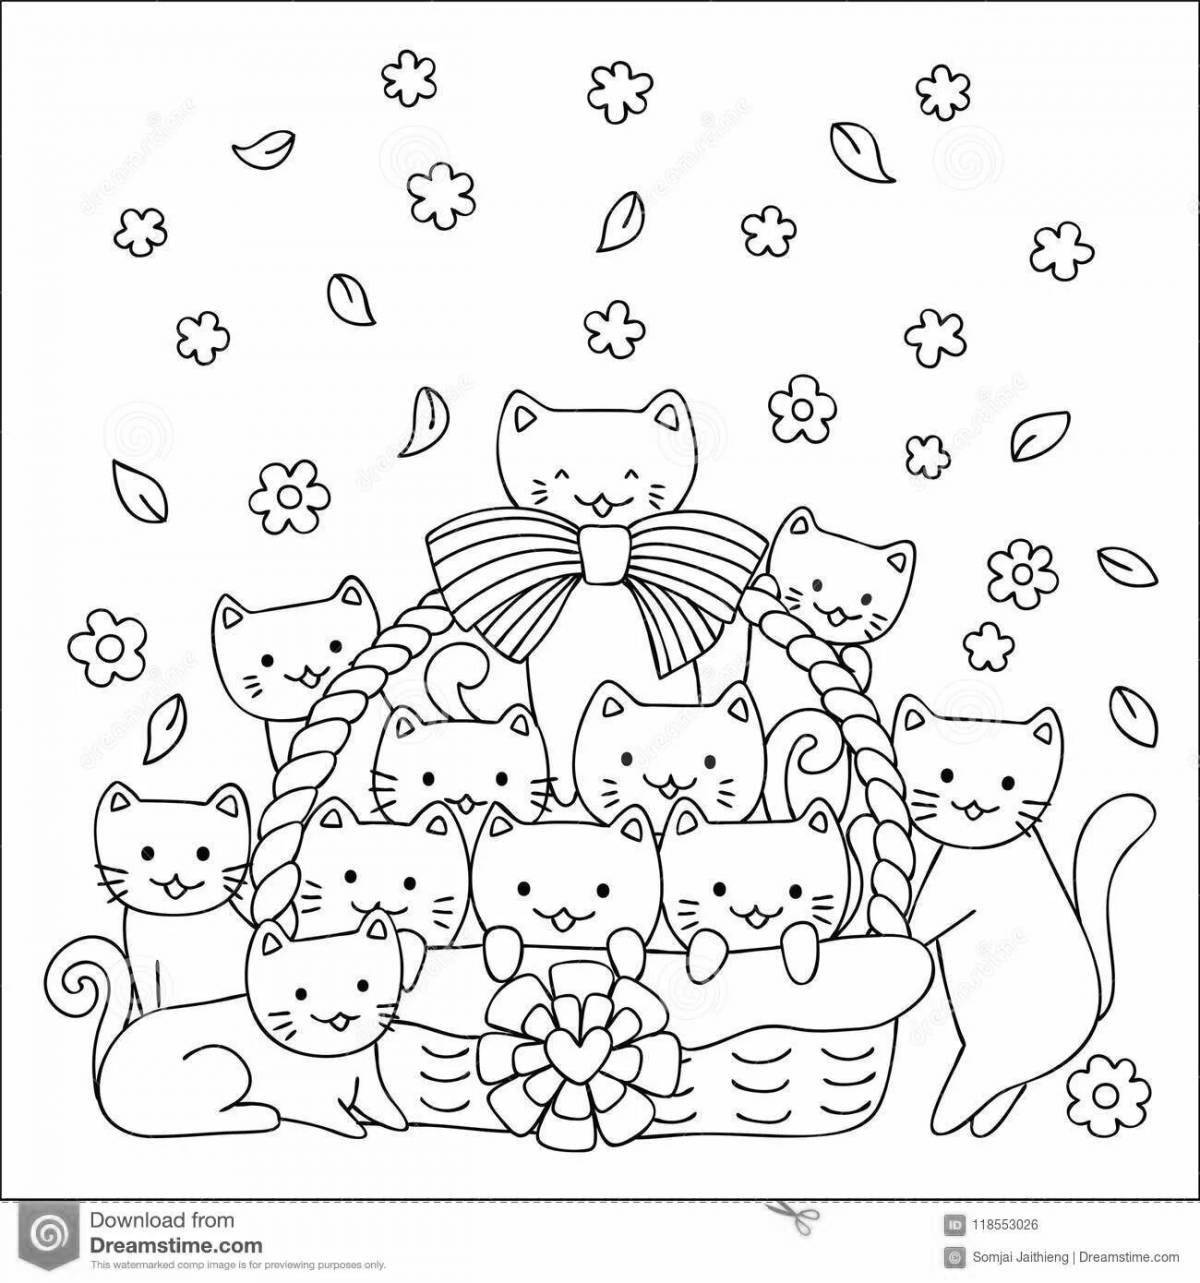 Fancy Christmas cats coloring page